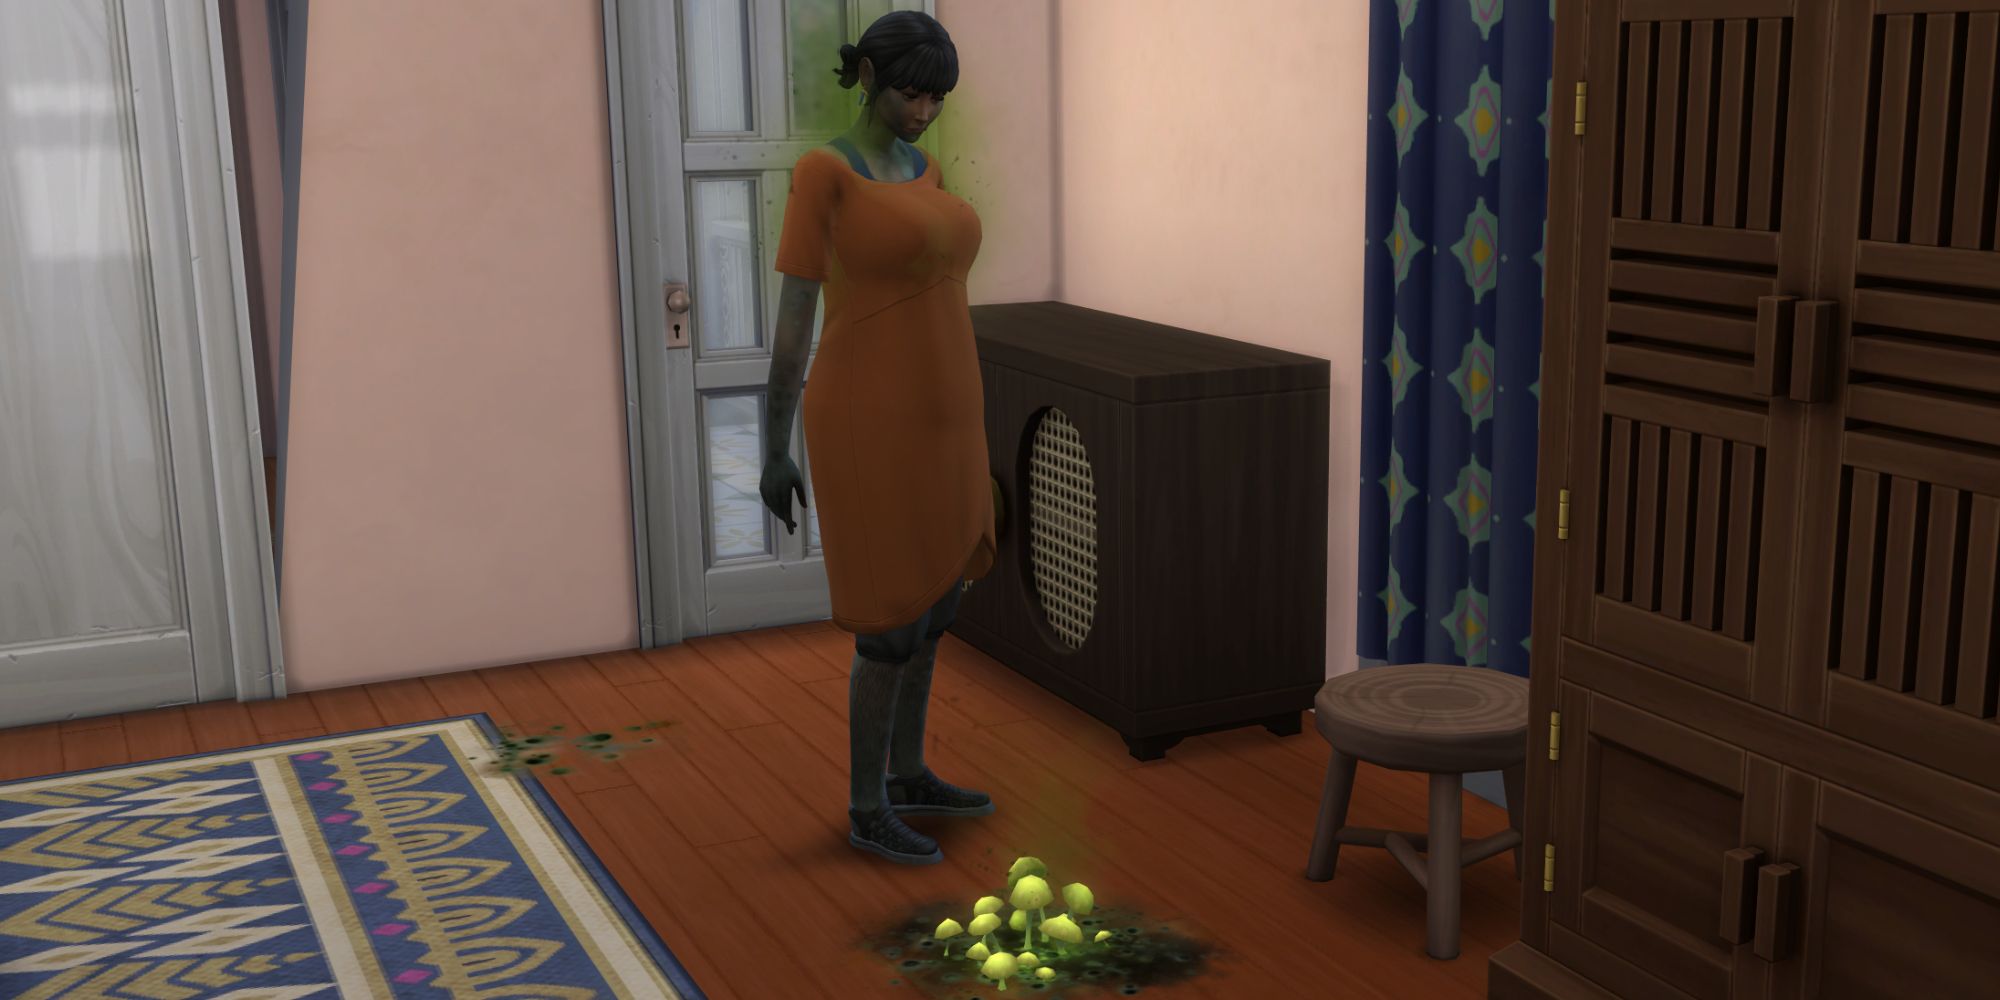 SIms 4 for rent infected sim in a room of mold